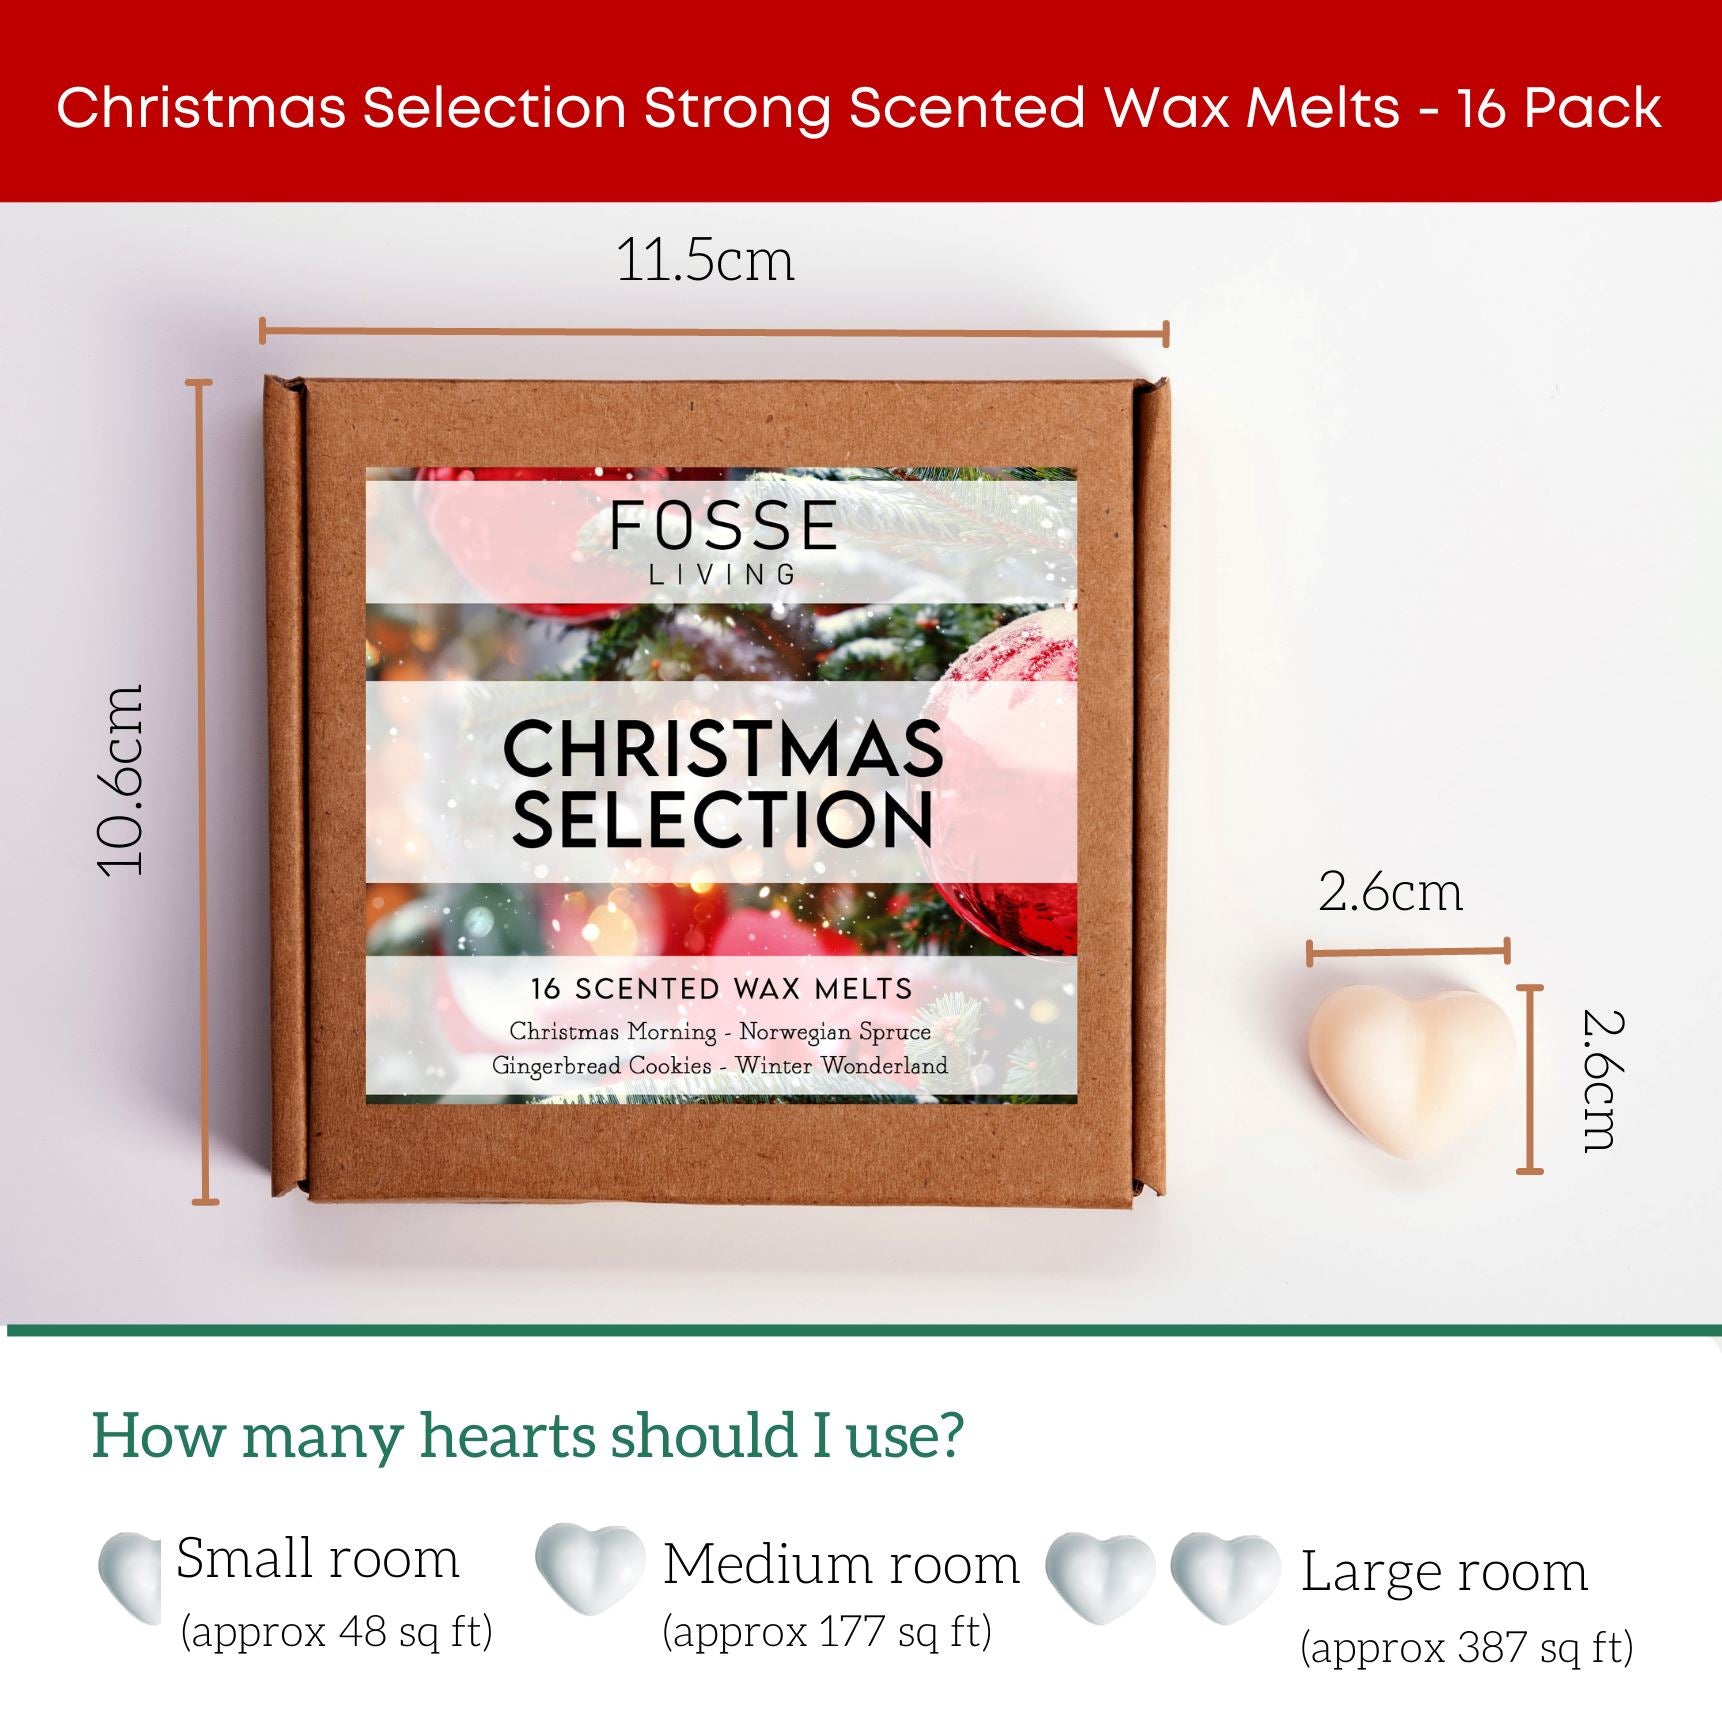 Christmas Selection Highly Scented Soy Wax Melts - 16 Pack Fosse Living dimension information